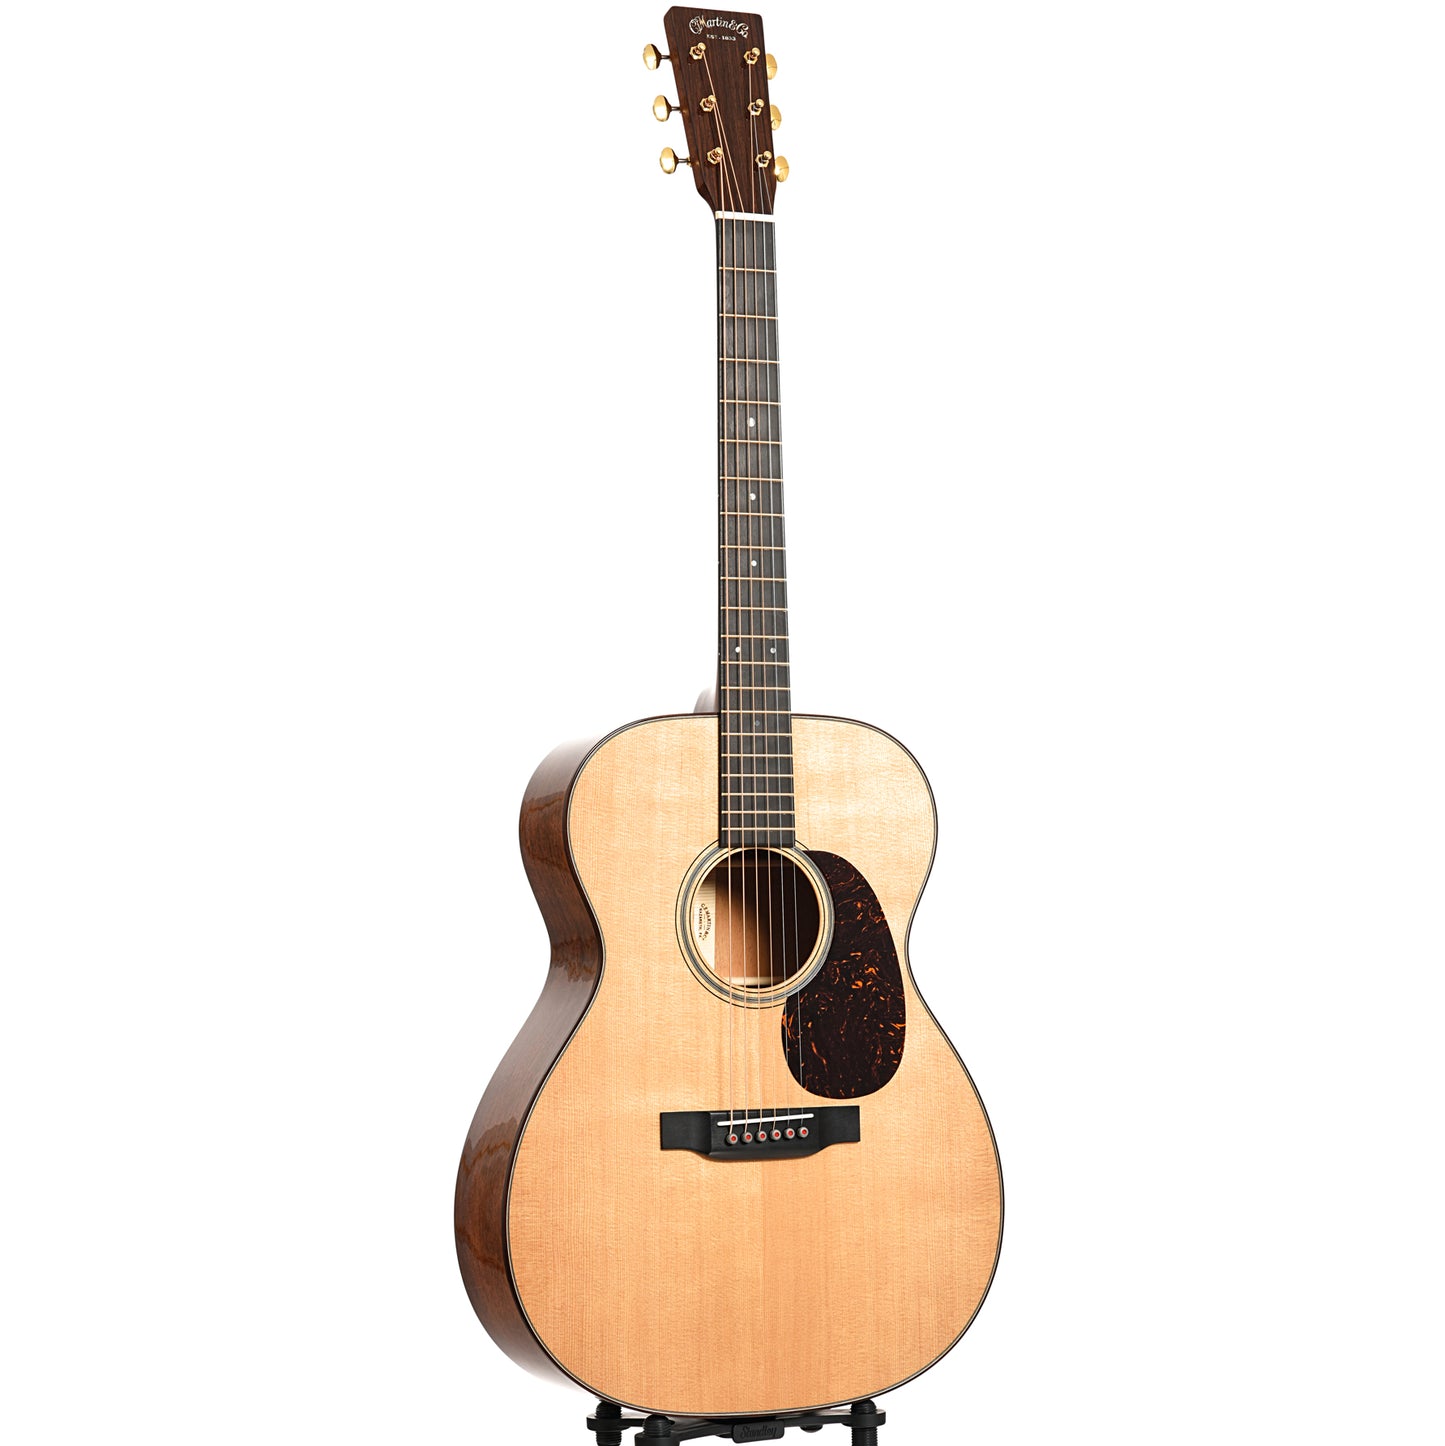 Image 11 of Martin 000-18 Modern Deluxe Guitar & Case- SKU# 00018MDLX : Product Type Flat-top Guitars : Elderly Instruments